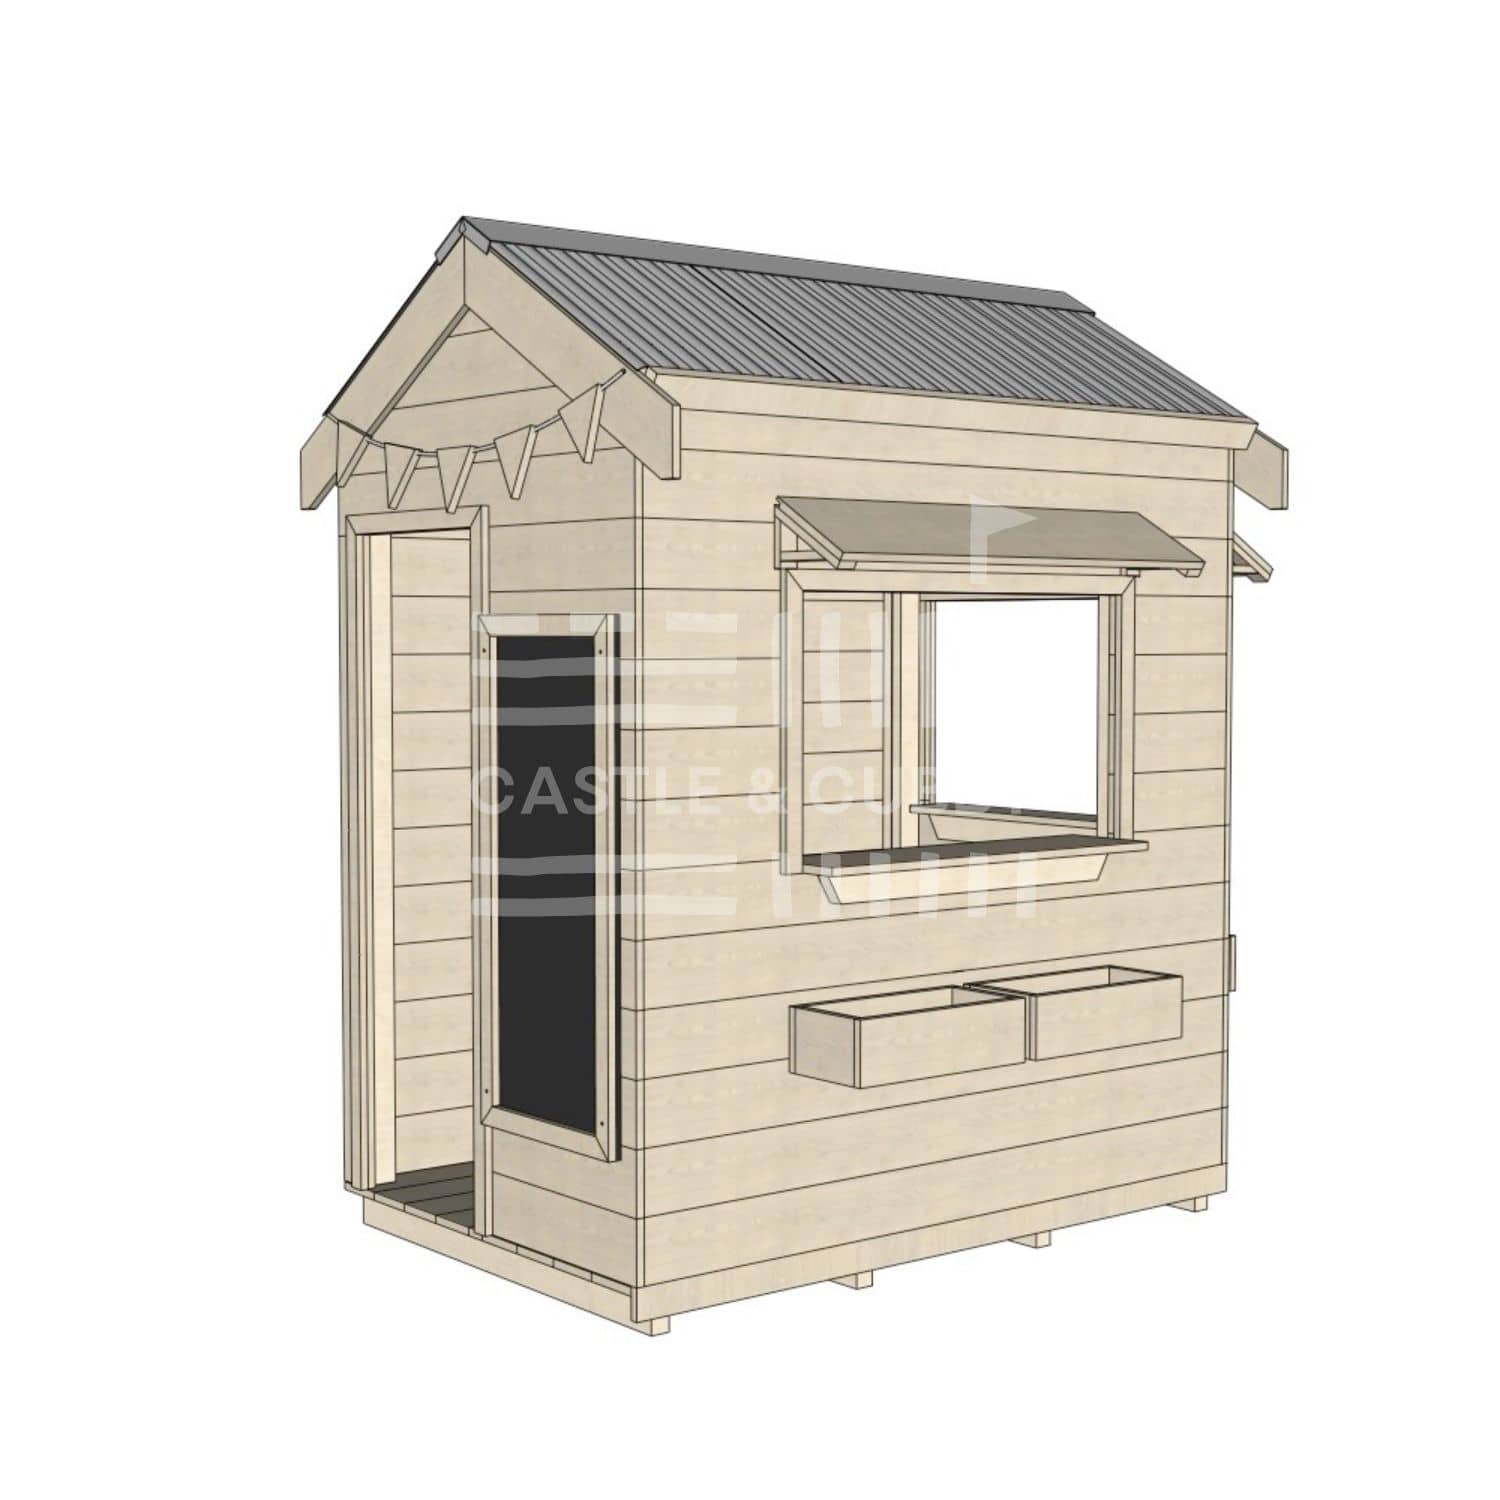 Pitched roof extra height raw wooden cubby house commercial education little rectangle accessories